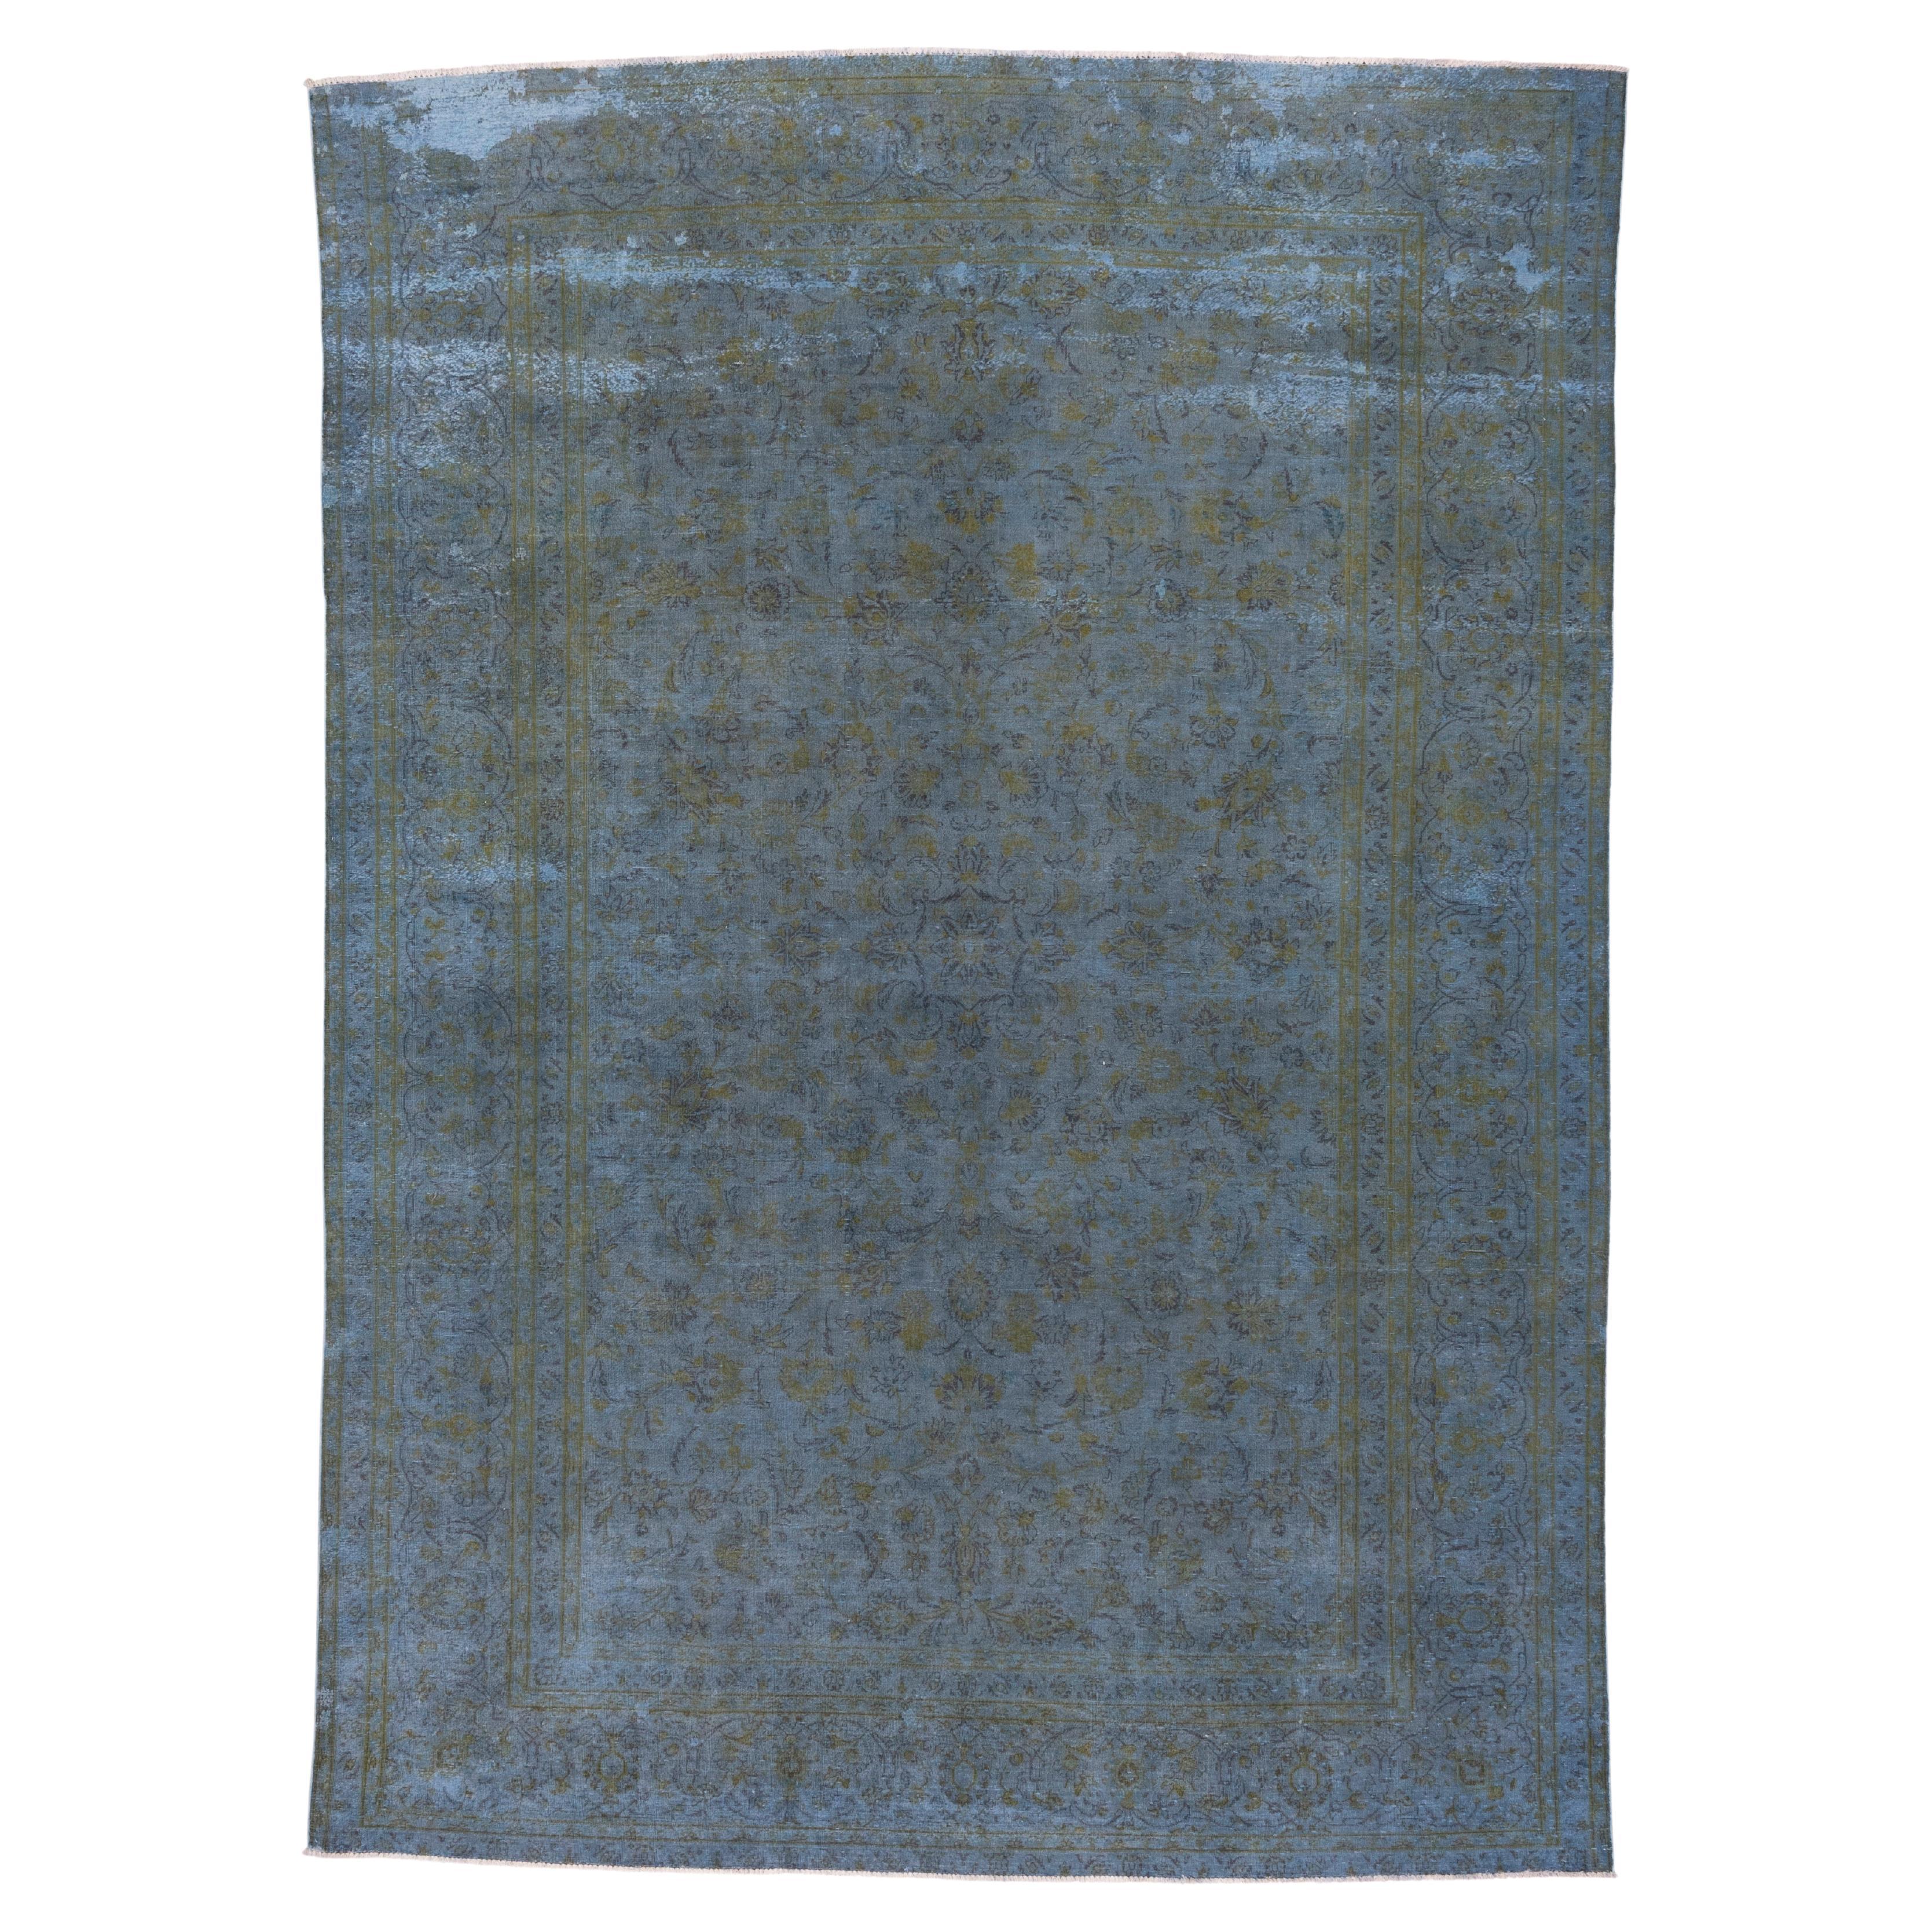 1940s  Distressed Blue Overdyed Rug, Citron Accents 